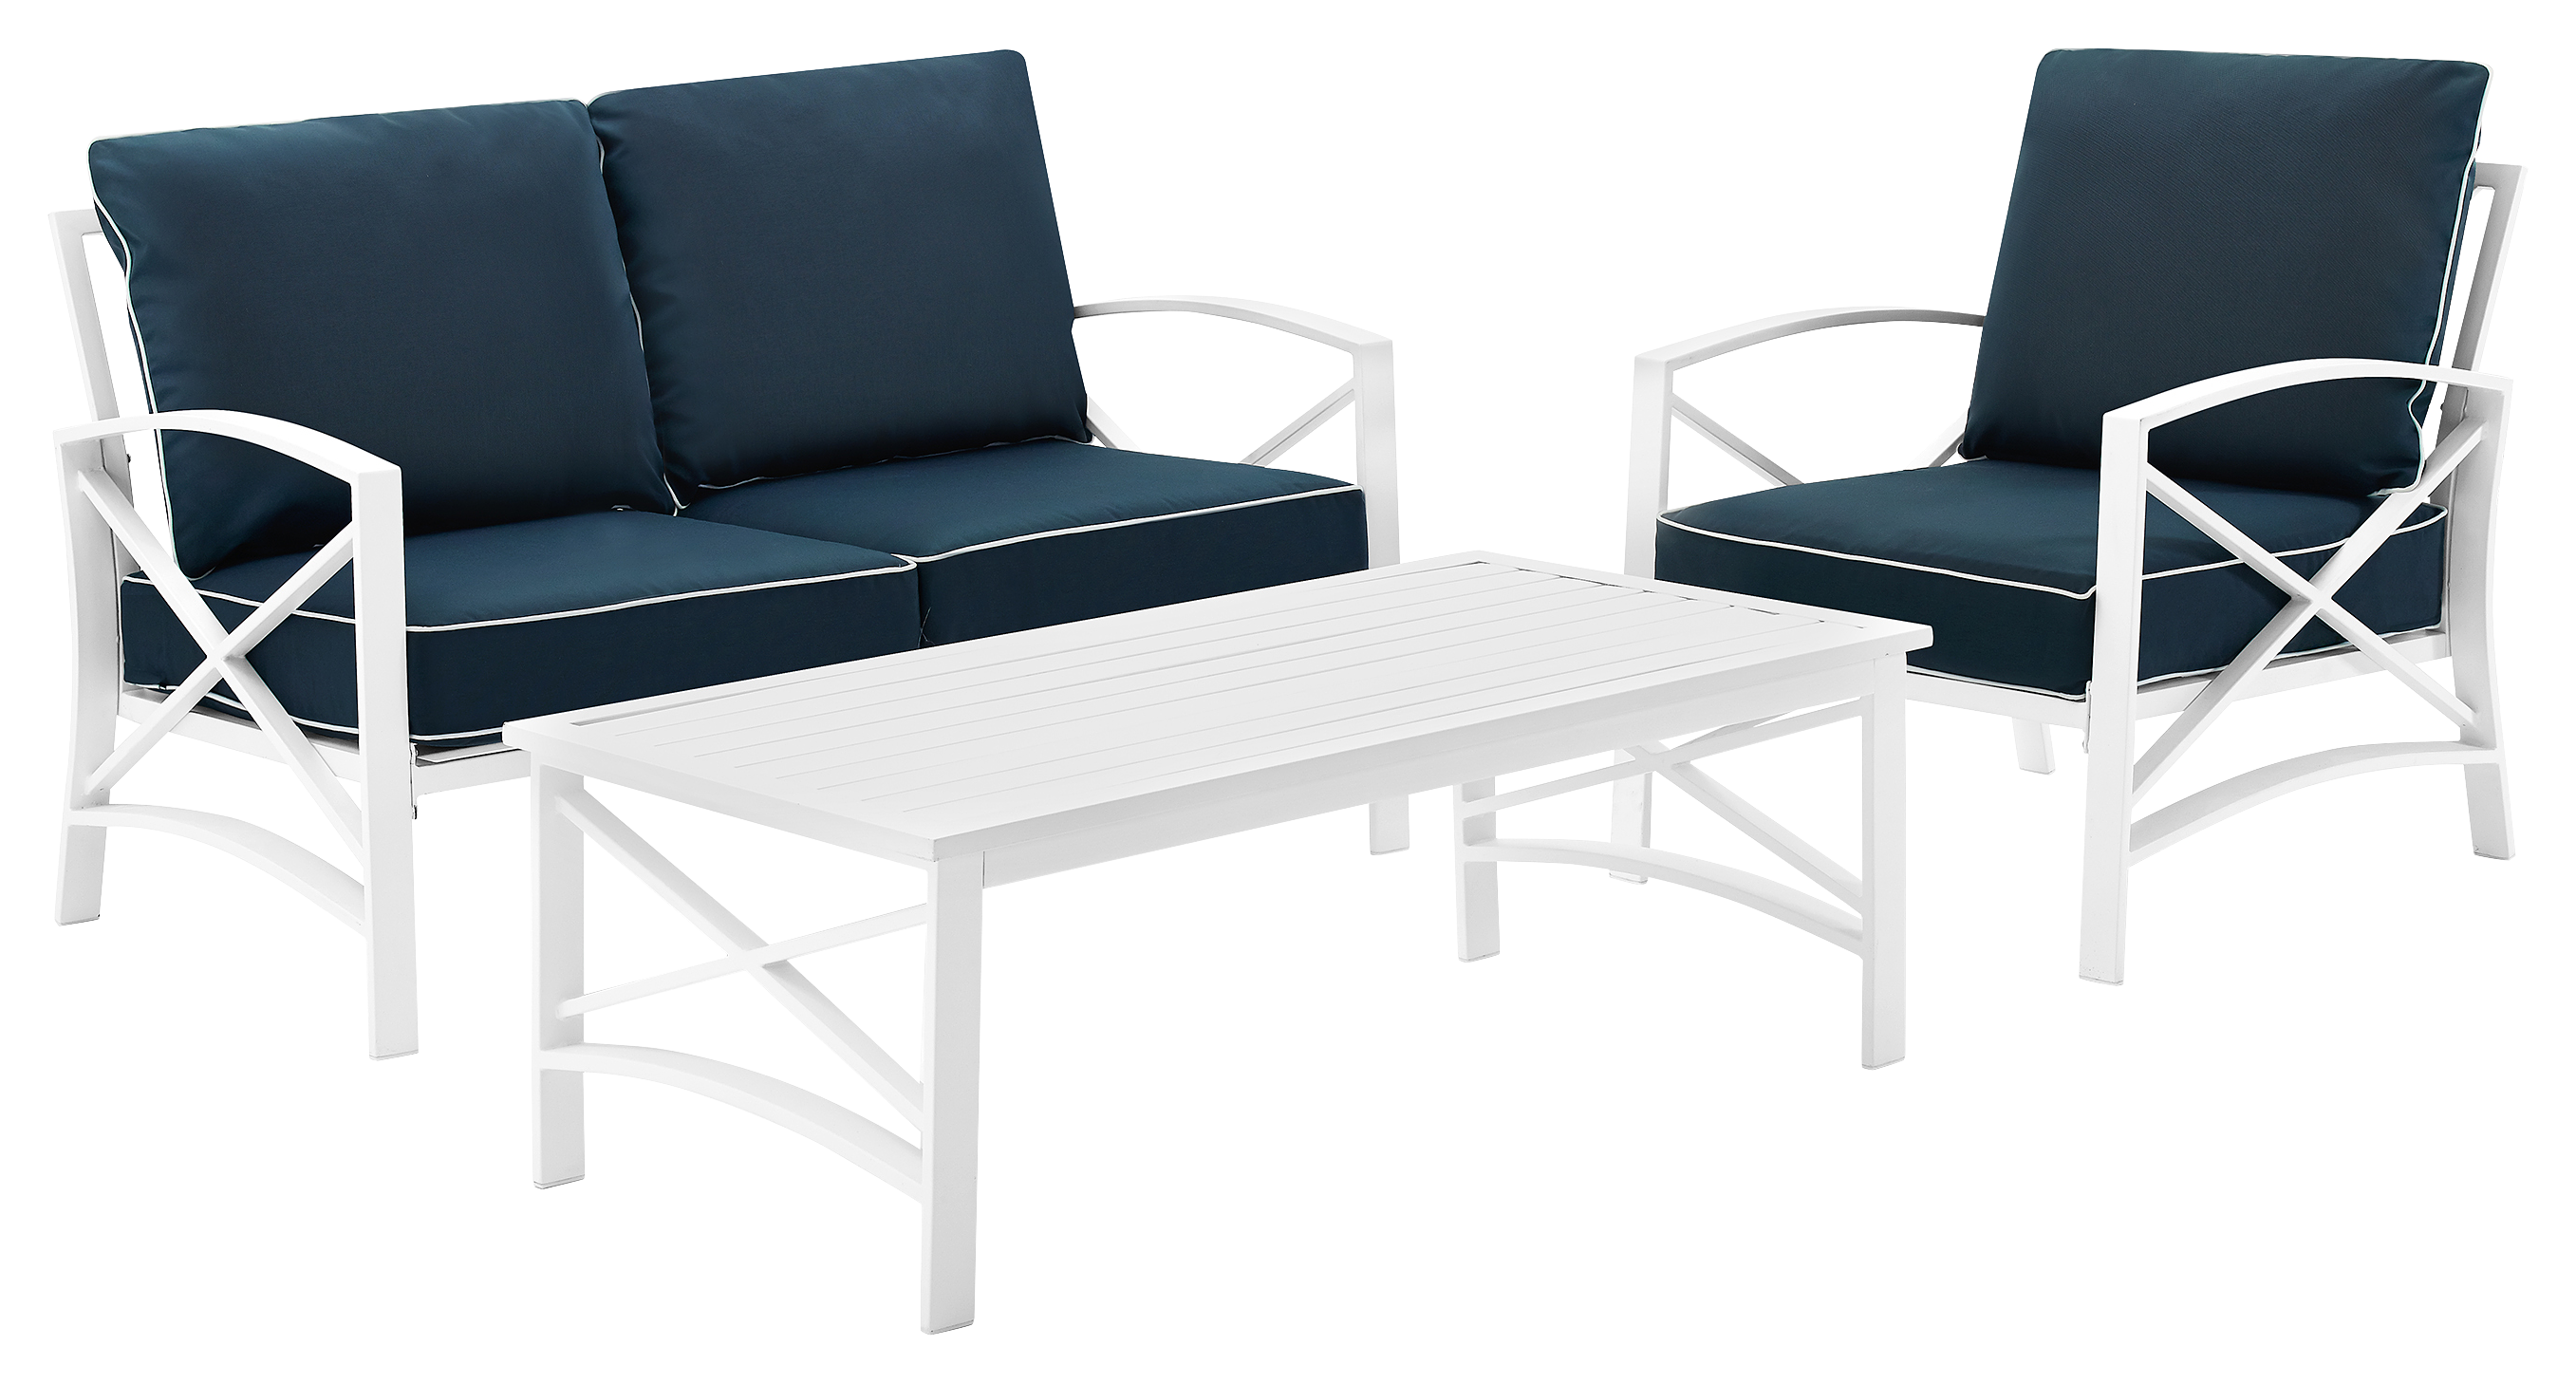 Crosley Kaplan Loveseat, Armchair, And Coffee Table 3 Piece Outdoor Metal Patio Furniture Set Navy/white